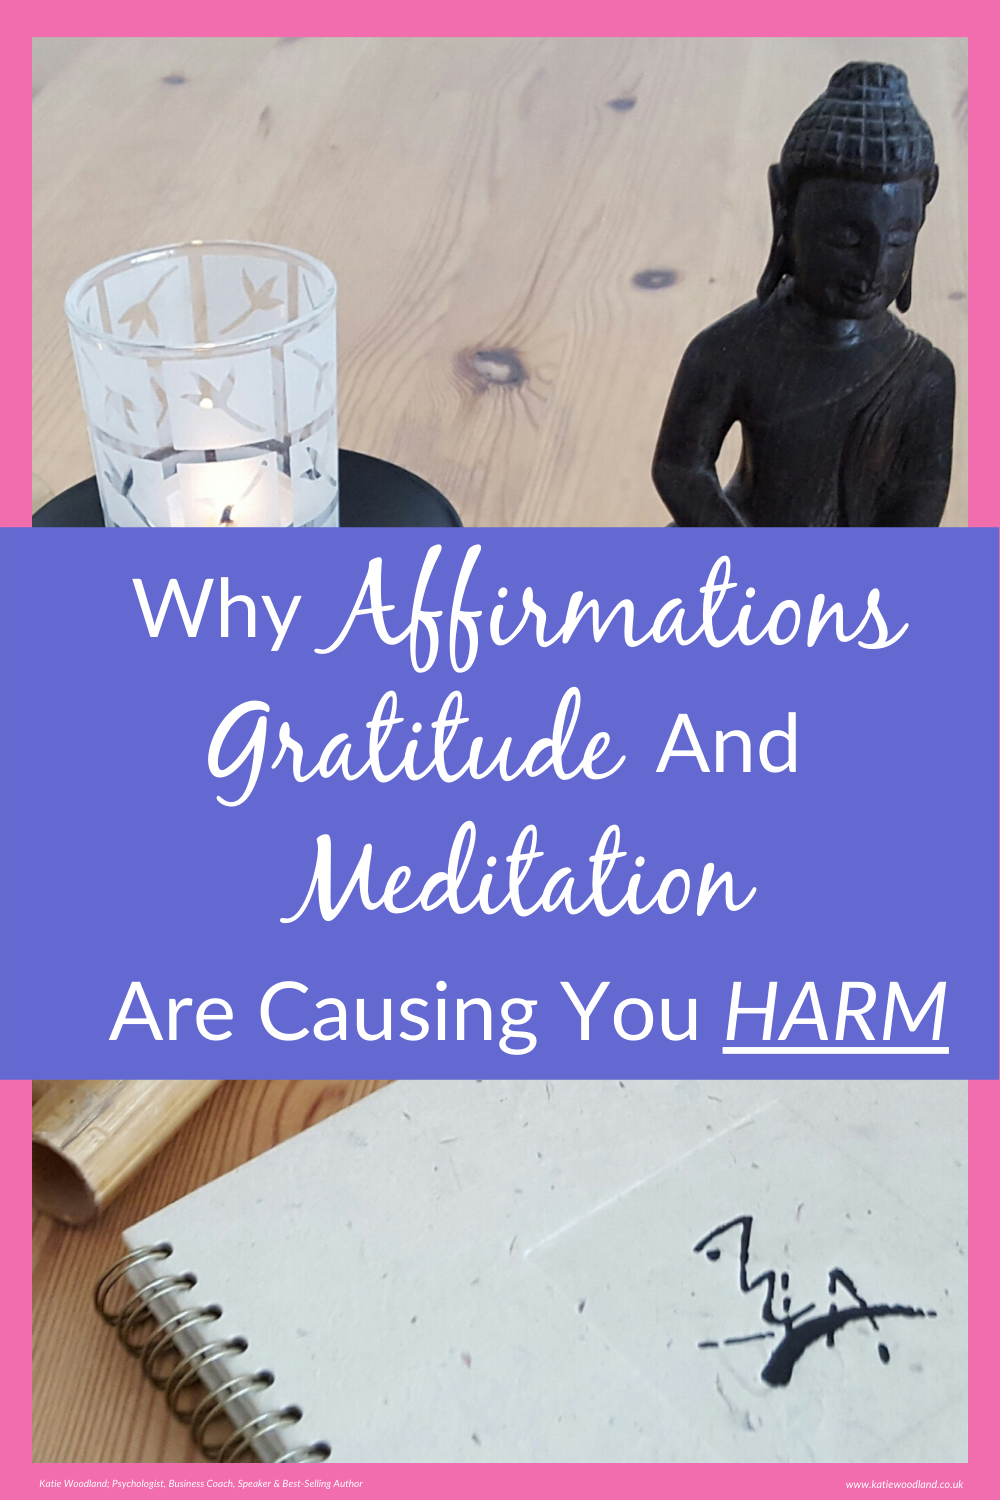 Why Affirmations Gratitude & Meditation Are Causing You HARM!